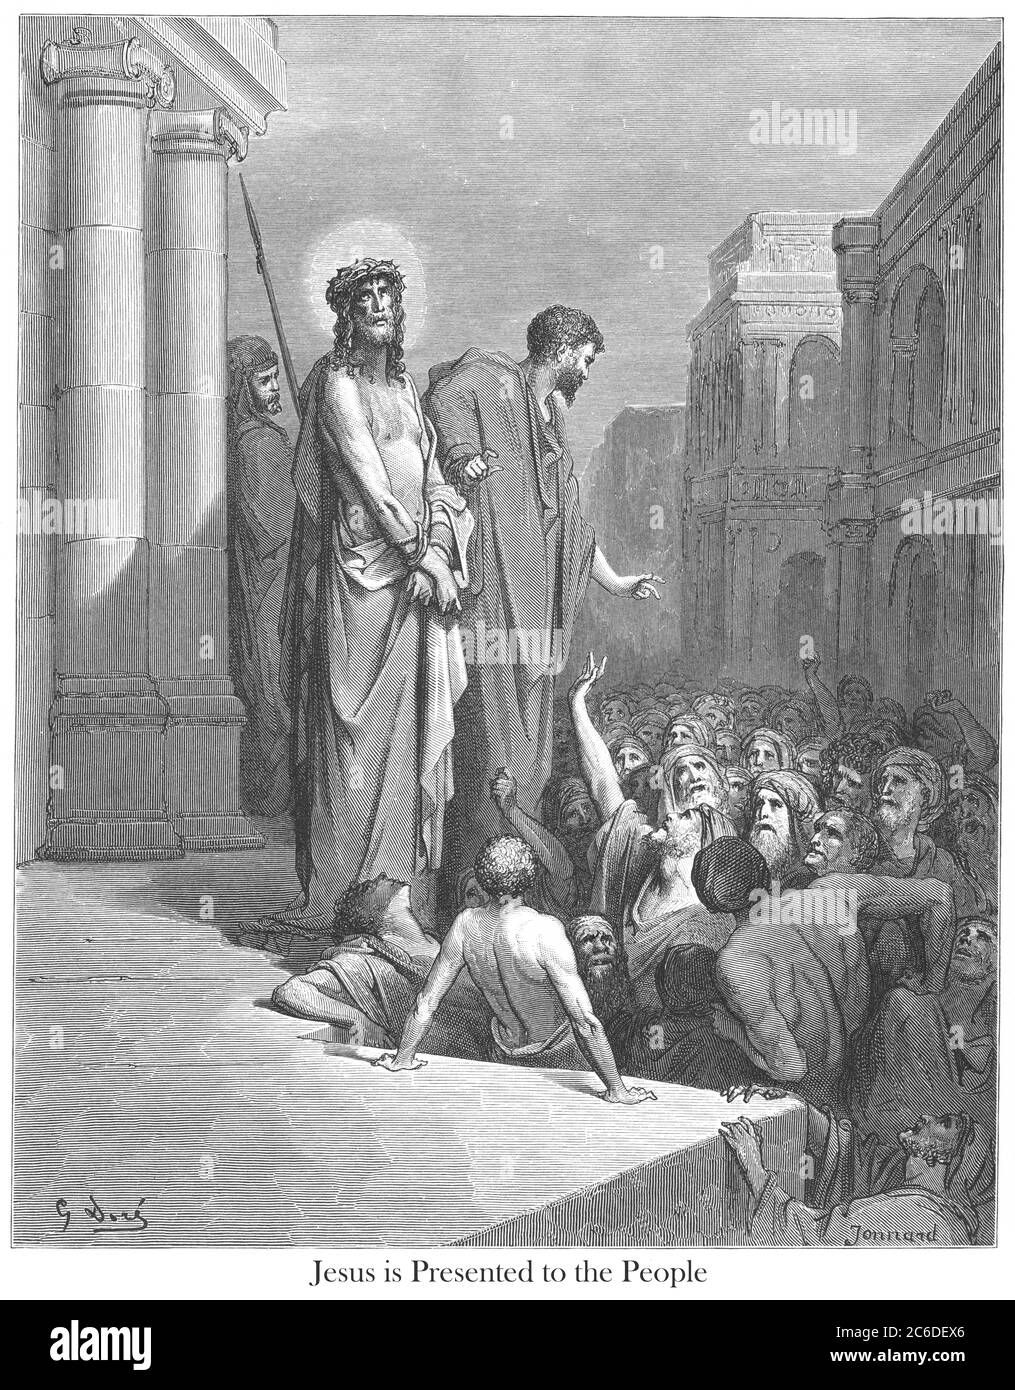 Jesus Christ Presented to the People [John 19:15] From the book 'Bible Gallery' Illustrated by Gustave Dore with Memoir of Dore and Descriptive Letter-press by Talbot W. Chambers D.D. Published by Cassell & Company Limited in London and simultaneously by Mame in Tours, France in 1866 Stock Photo